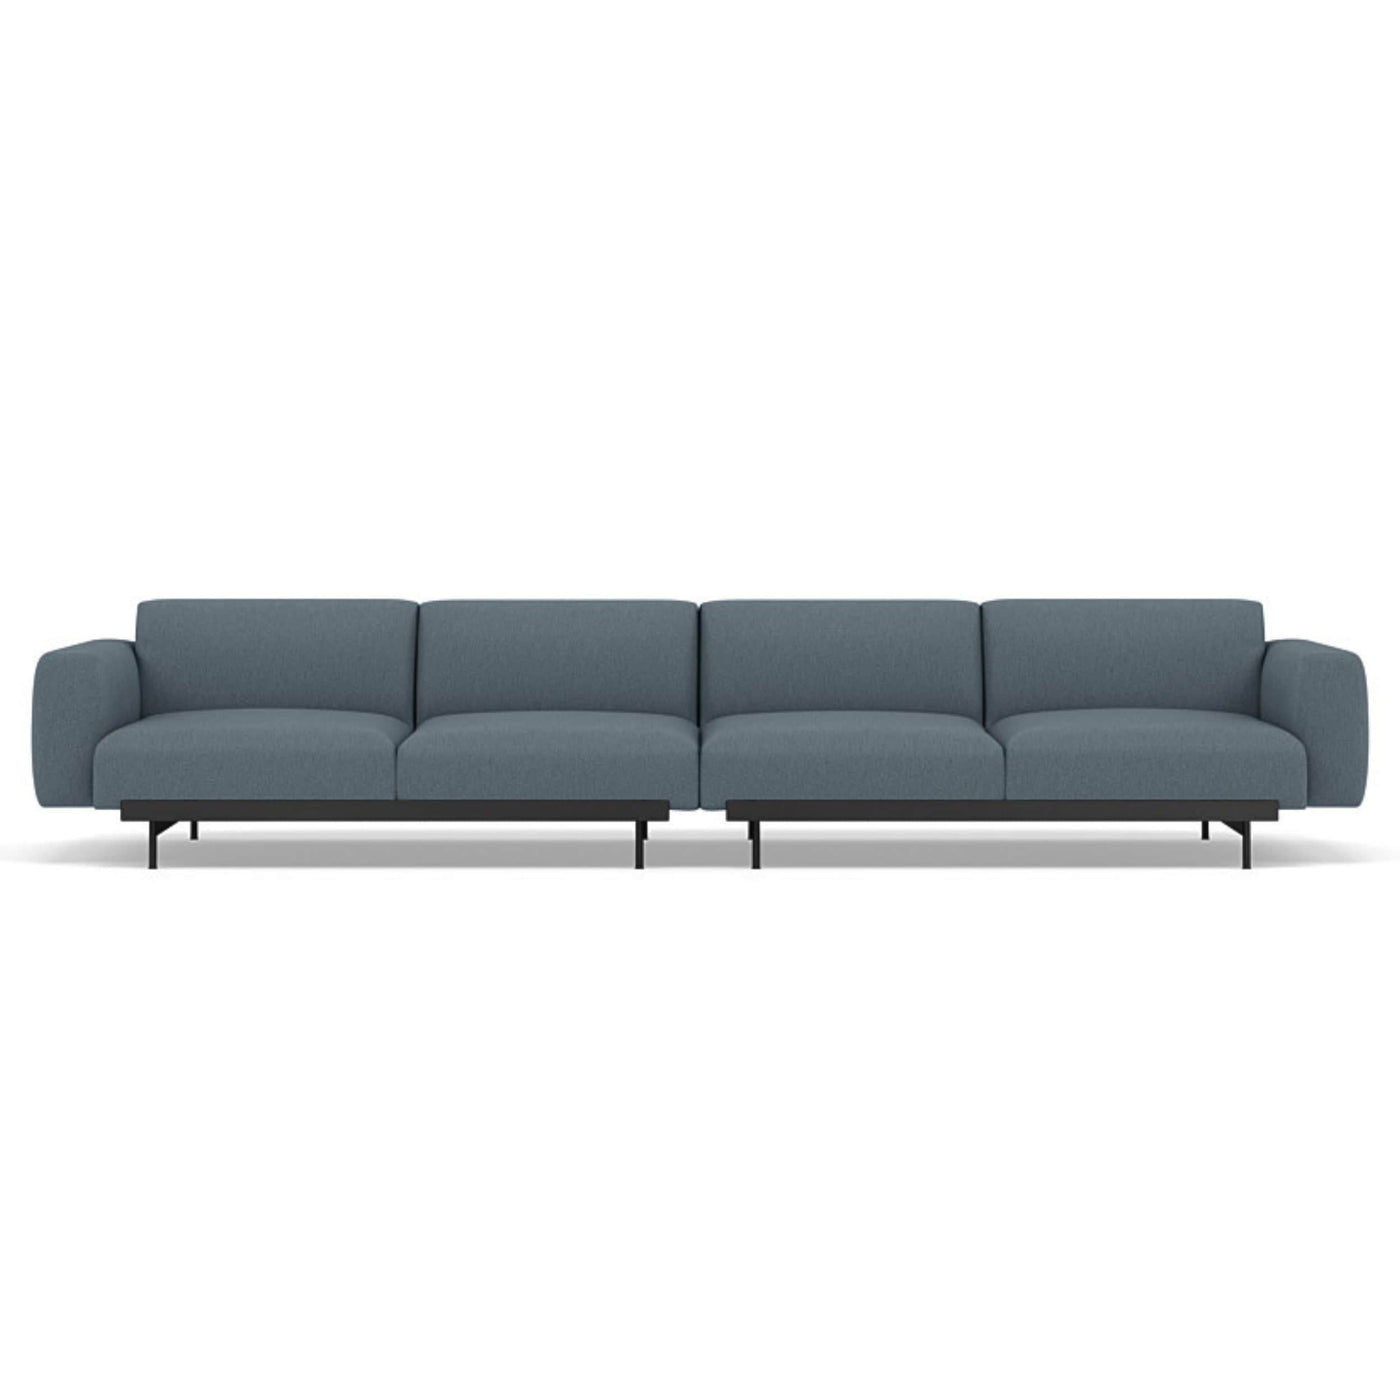 Muuto In Situ Modular 4 Seater Sofa configuration 1 in clay 1. Made to order from someday designs. #colour_clay-1-blue